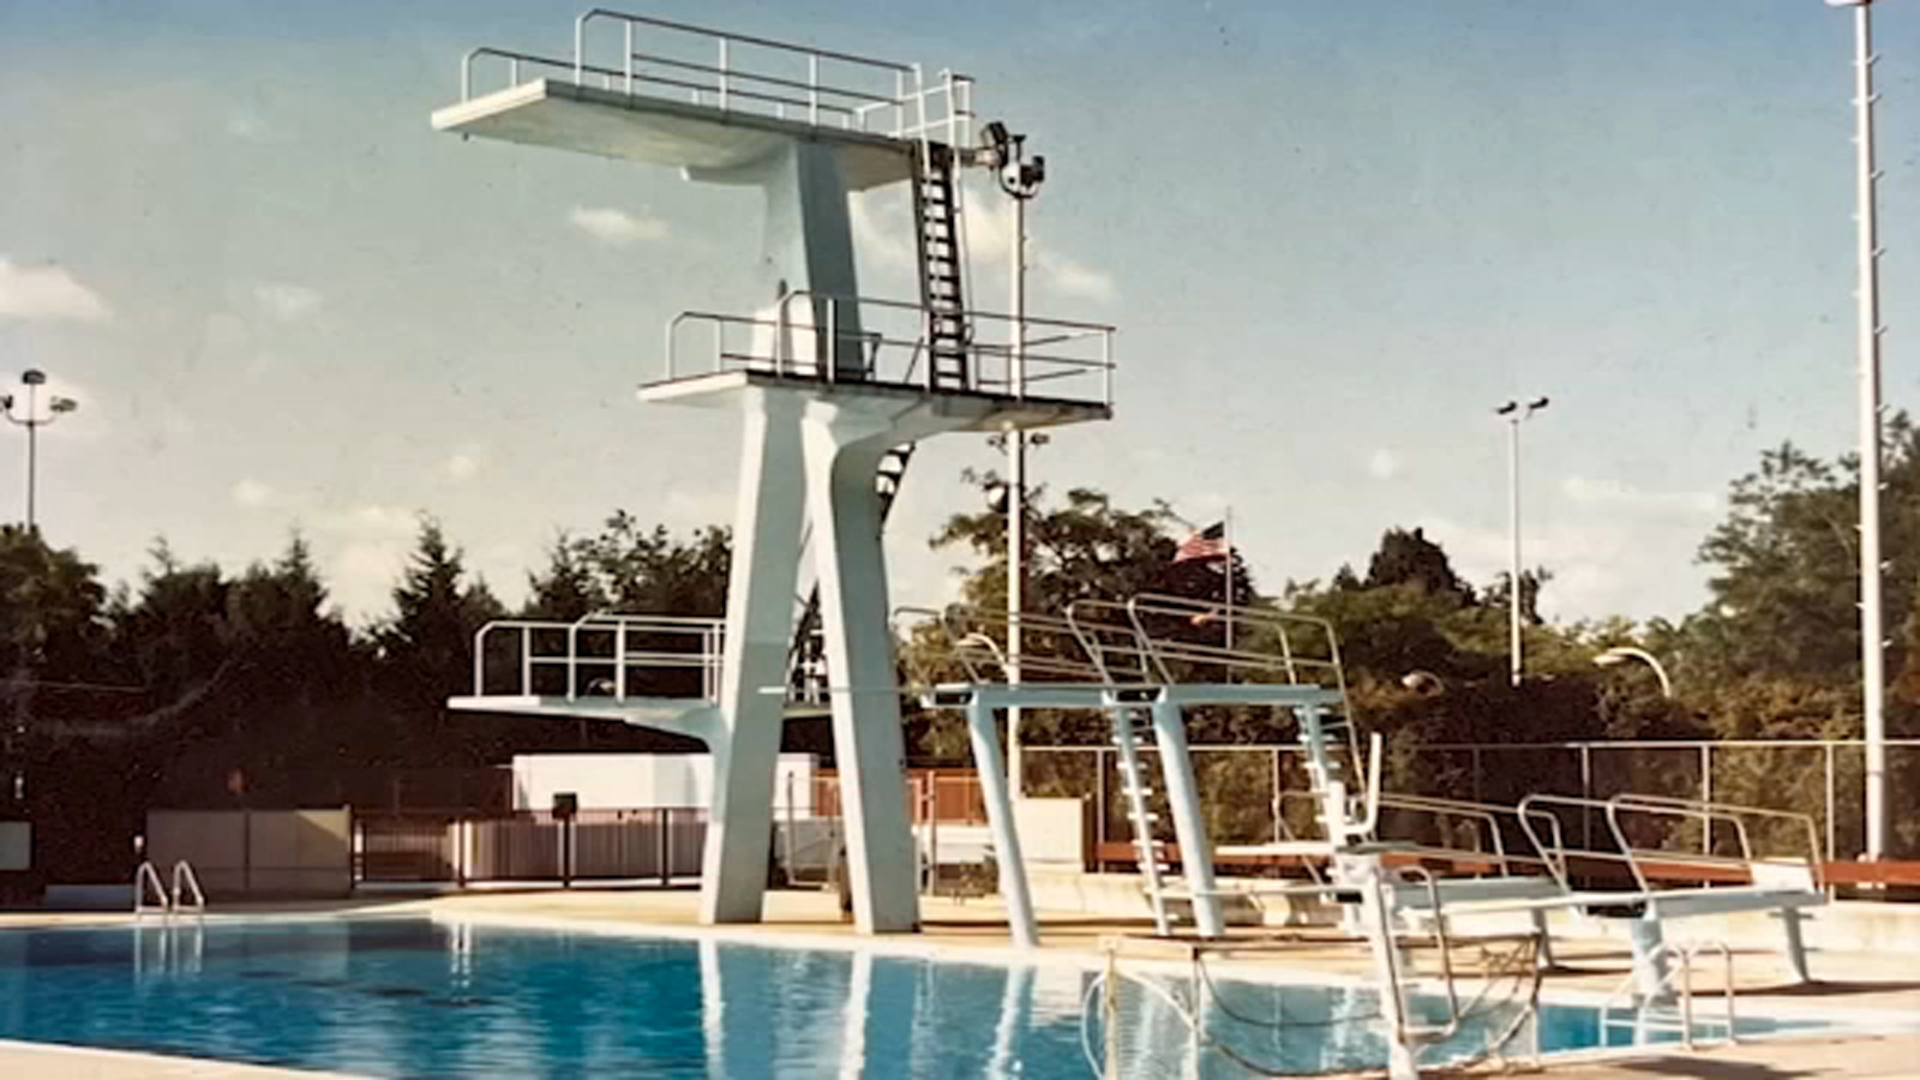 Future of popular Christopher Morley Park pool in Roslyn remains unclear